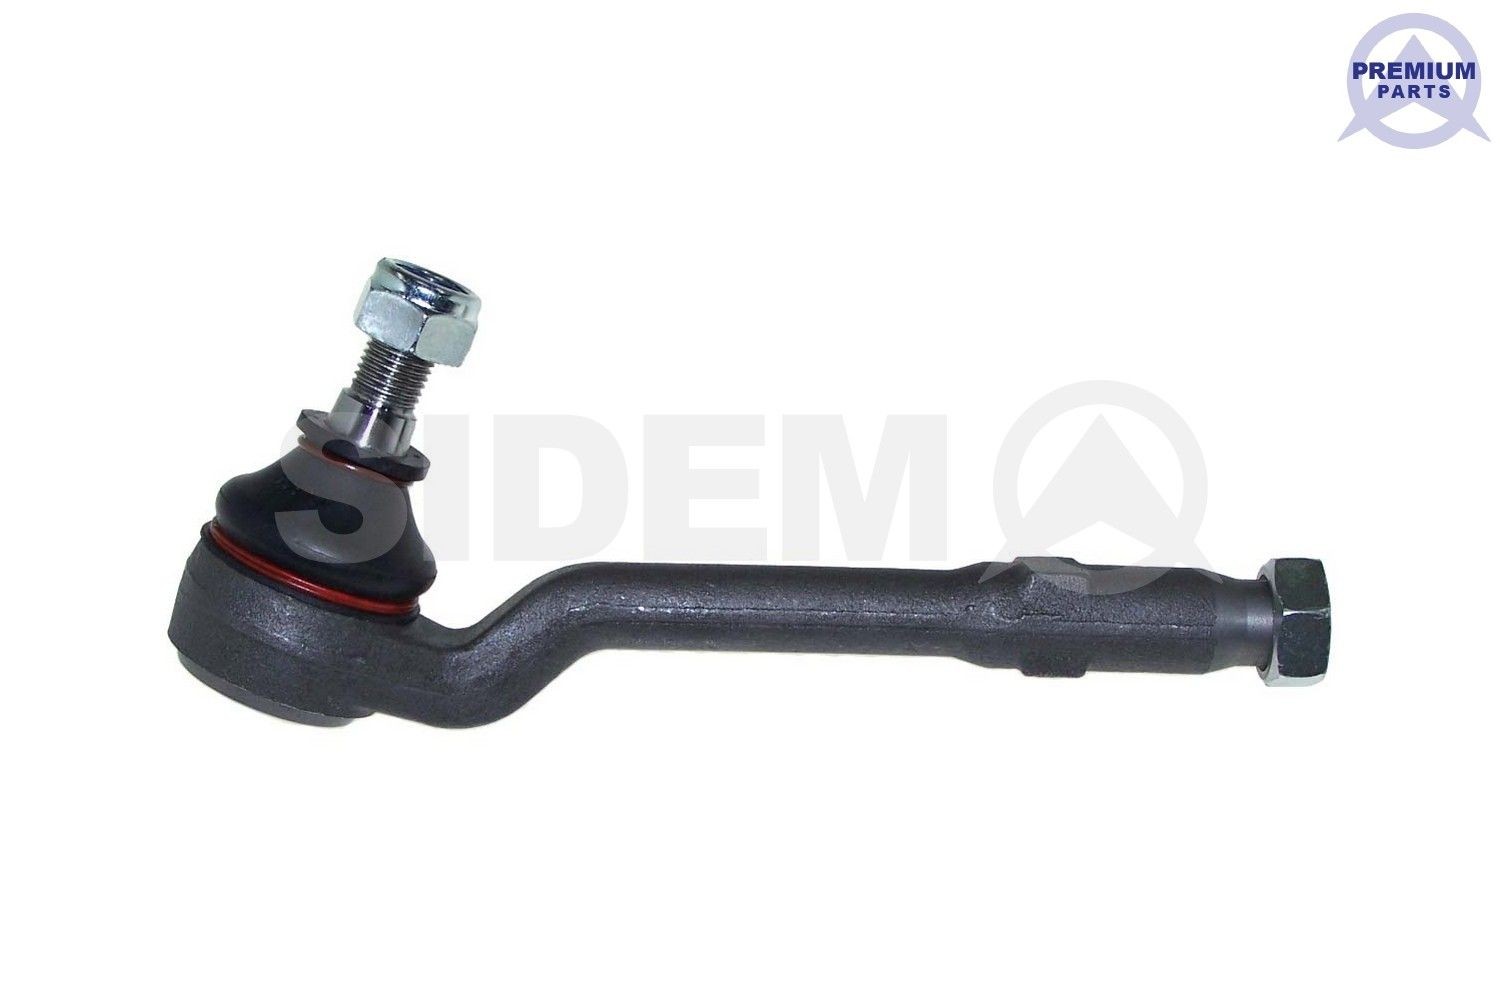 SIDEM Cone Size 15,4 mm, Front Axle Cone Size: 15,4mm, Thread Size: FM14x1,5R Tie rod end 21536 buy